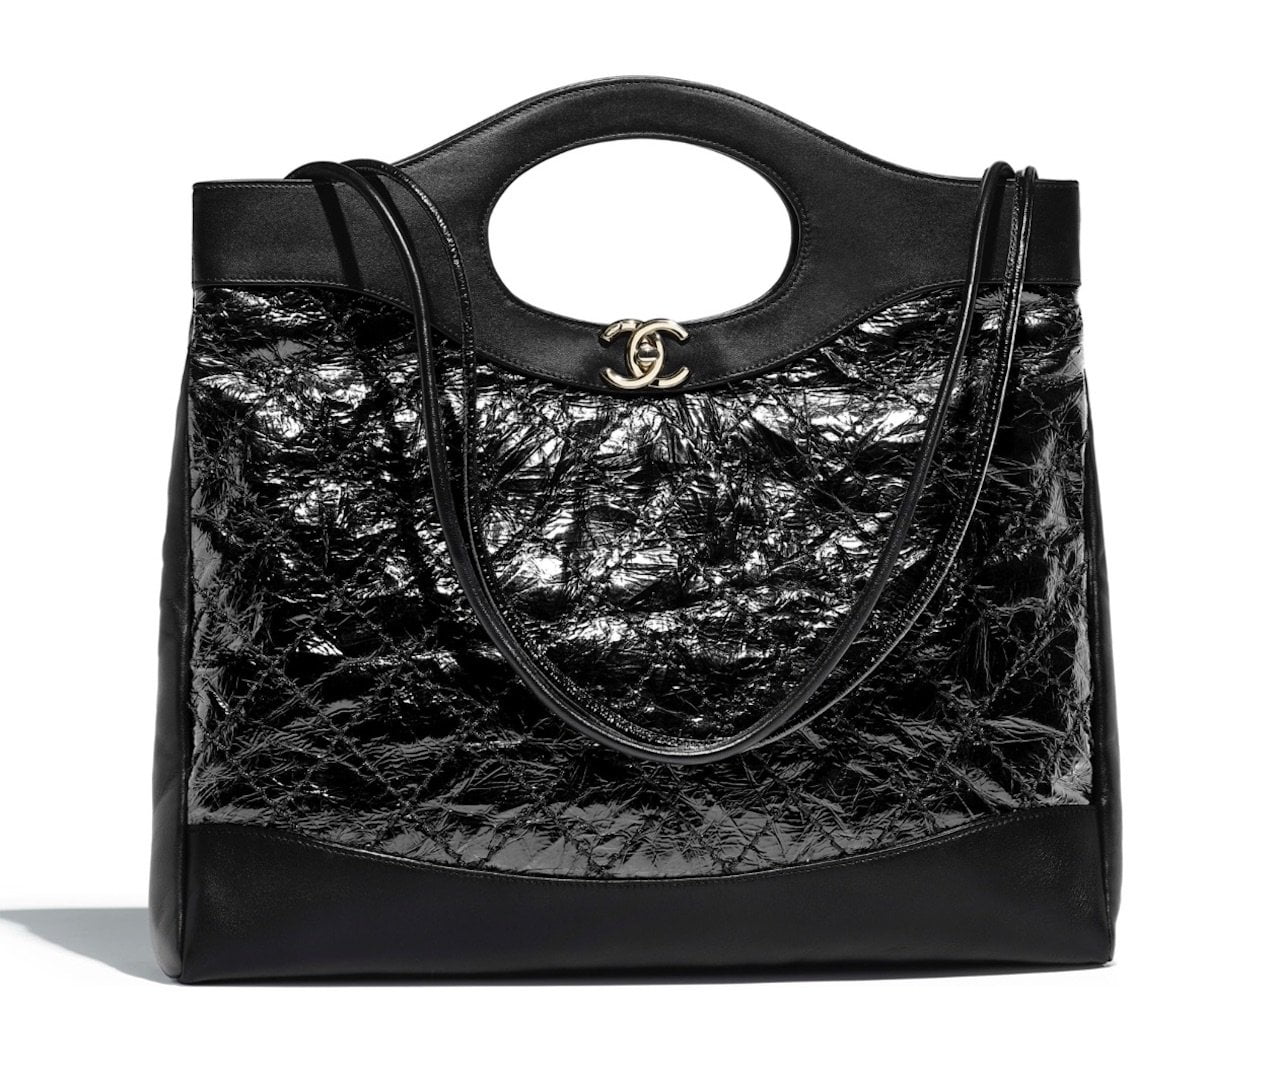 Chanel 22 Handbag Large 22S Calfskin White/Black Logo in Calfskin Leather  with Gold-tone - US